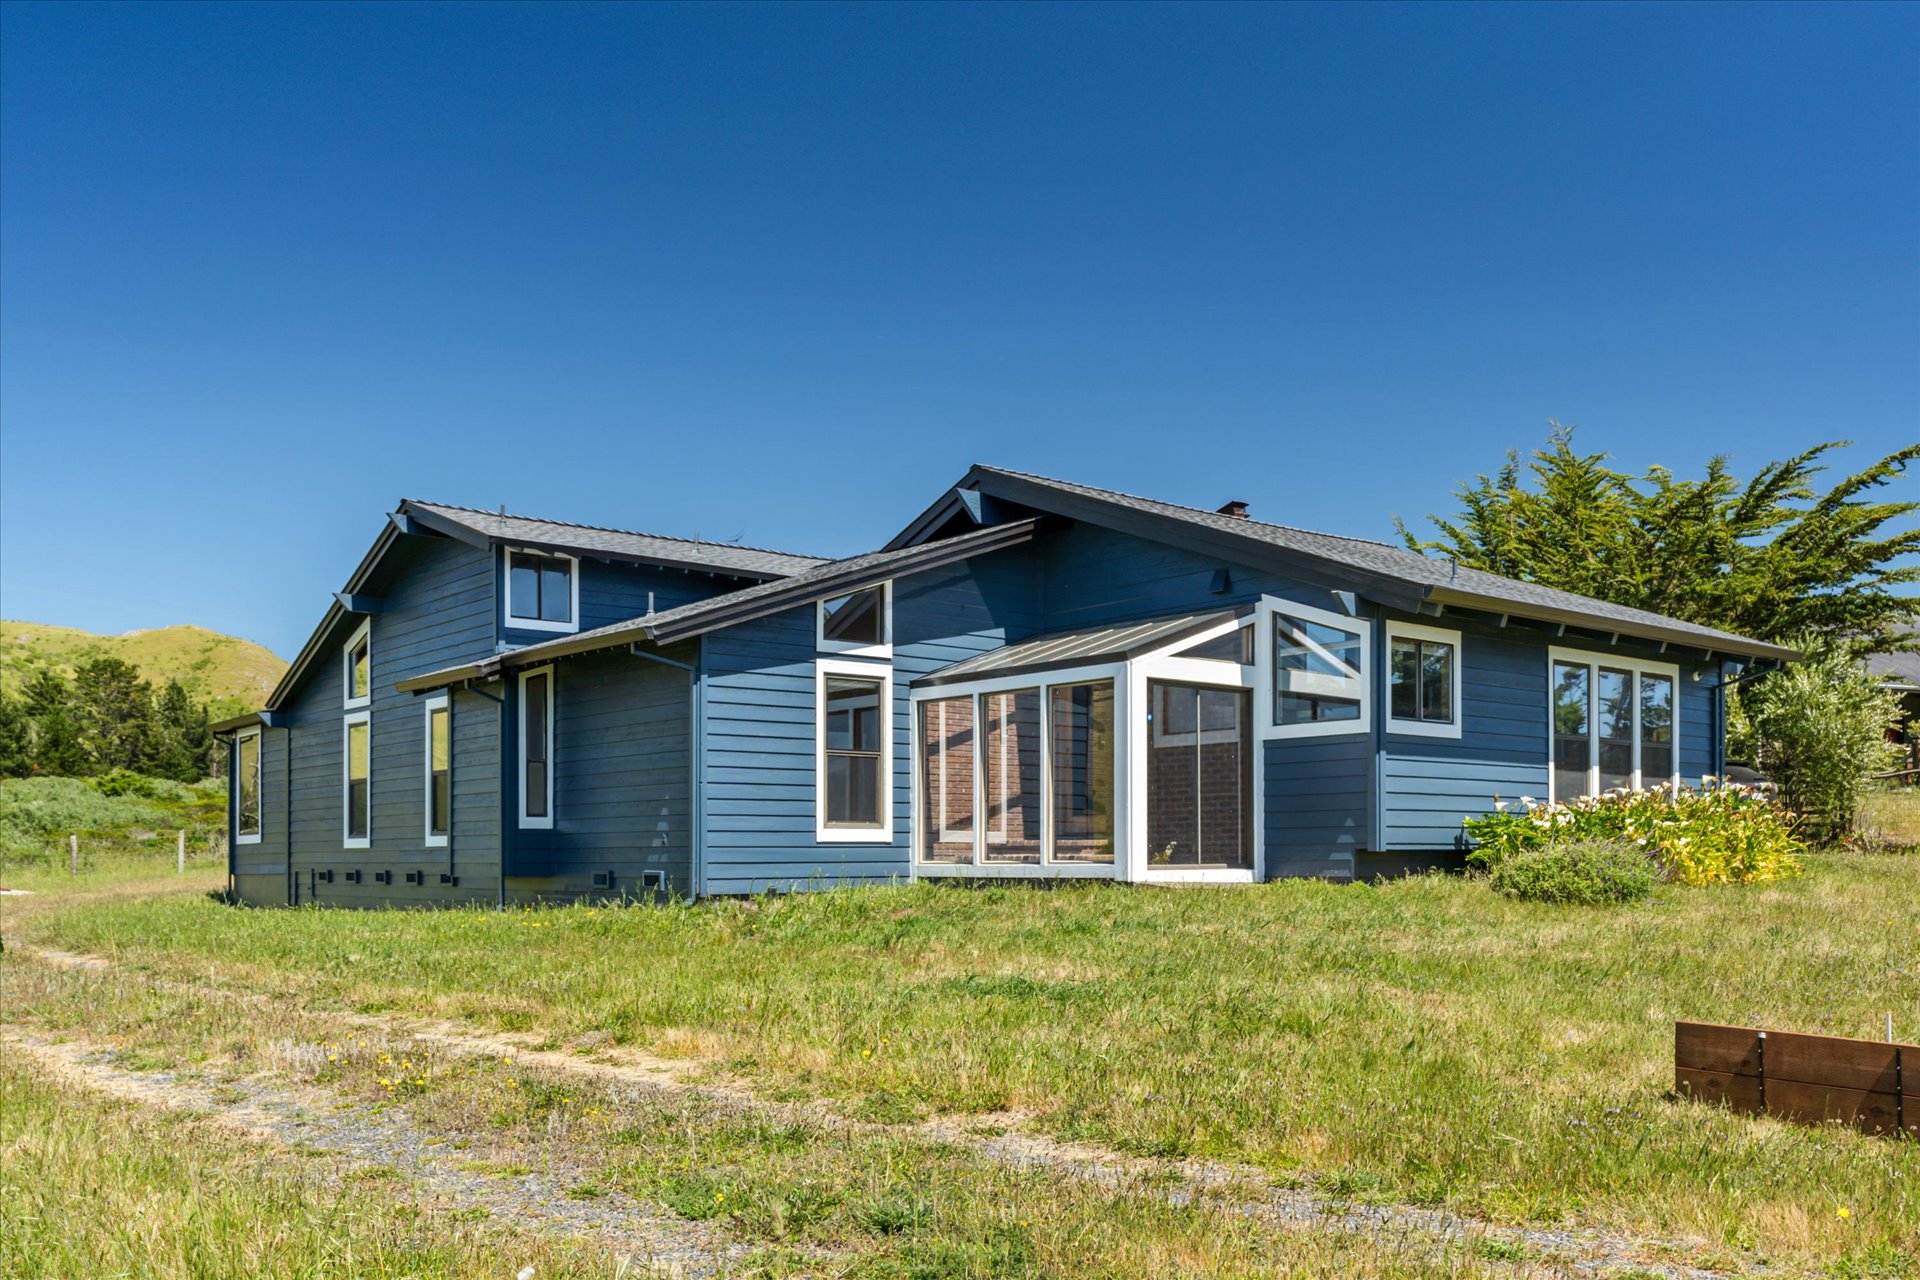 Newly Designed and remolded Bodega Bay home! 1 min drive to beac. 